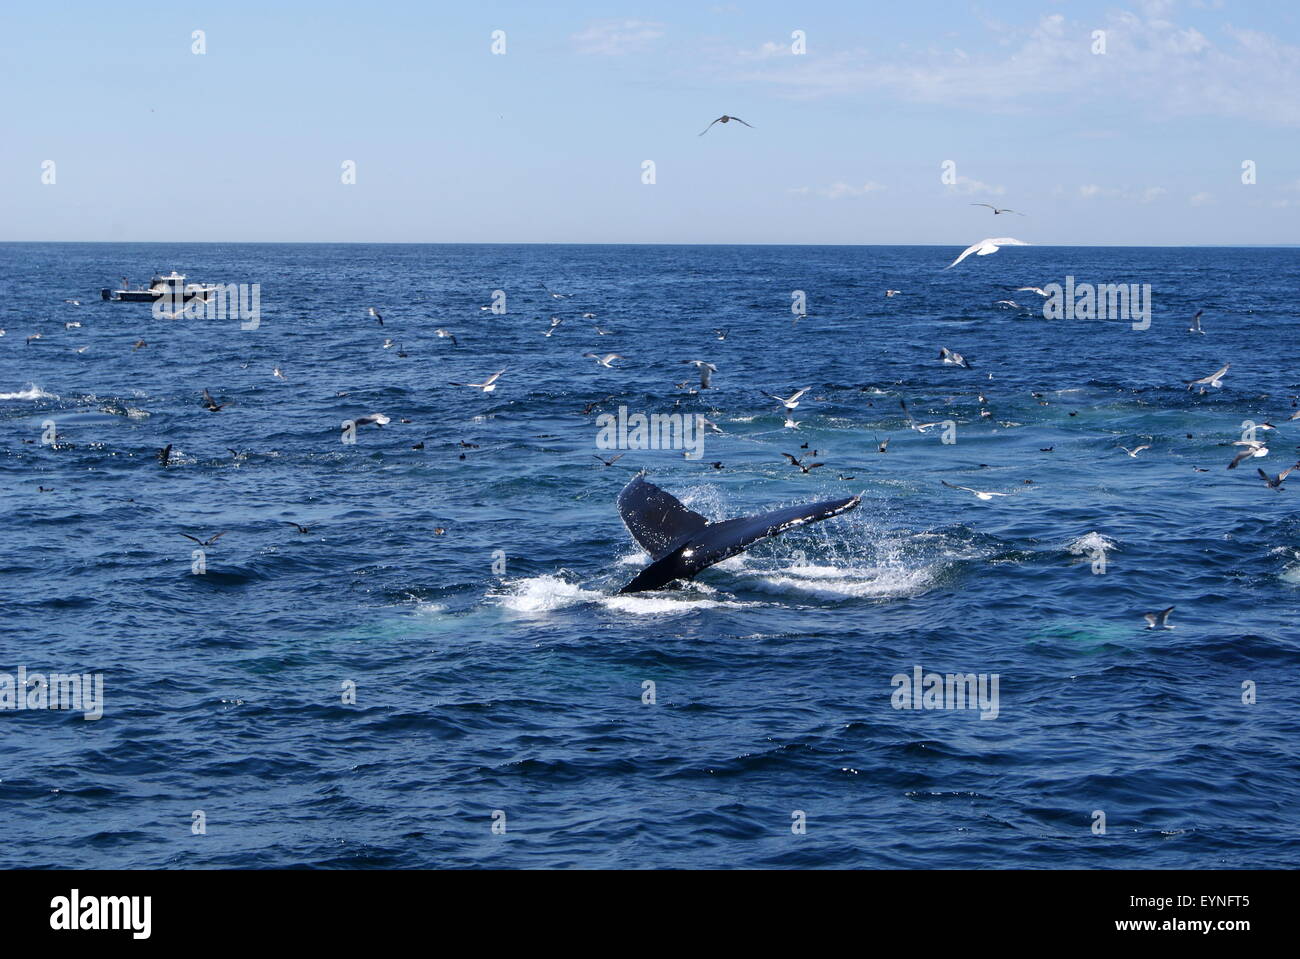 The tail fluke of a humpback whale as the whale starts to dive, a small boat is visible in the background. Stock Photo